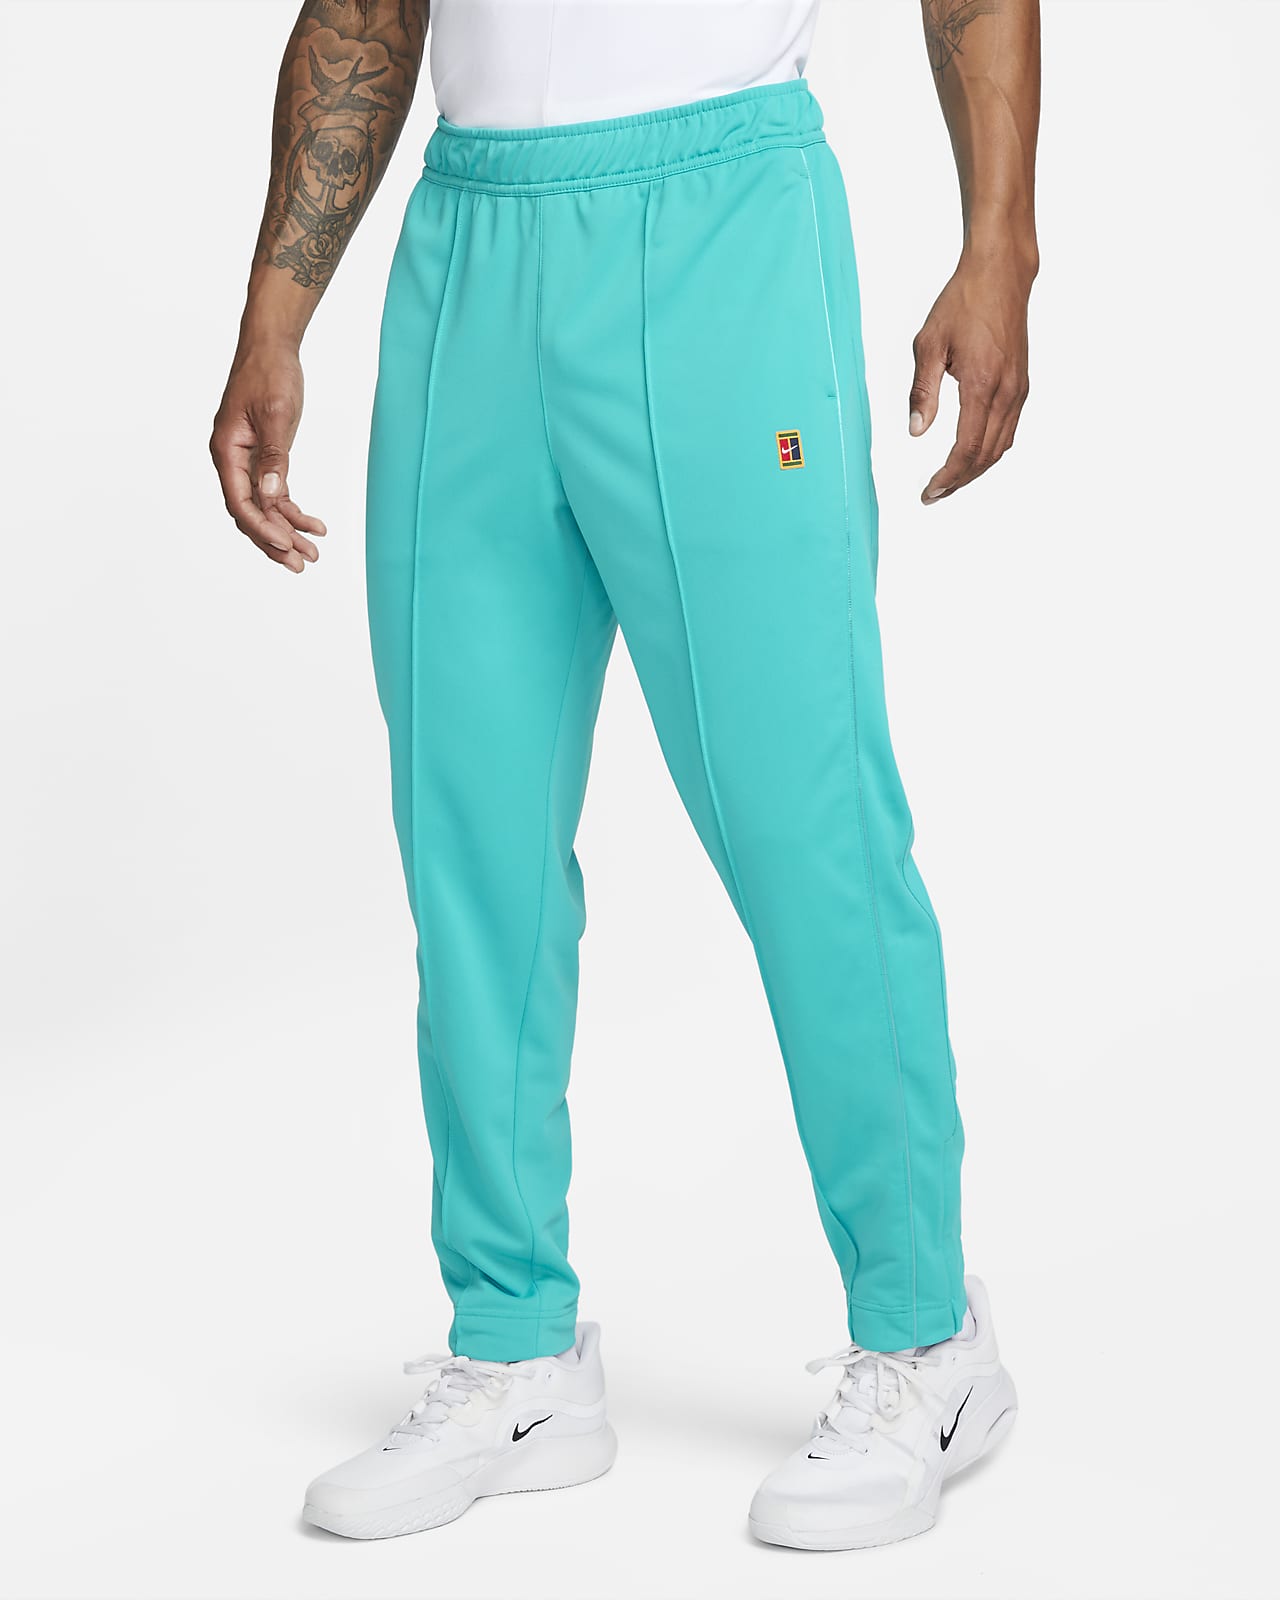 https://static.nike.com/a/images/t_PDP_1280_v1/f_auto,q_auto:eco/706ebed0-37b3-48ee-97fa-5897d4a27deb/nikecourt-tennis-trousers-Fd65Kw.png